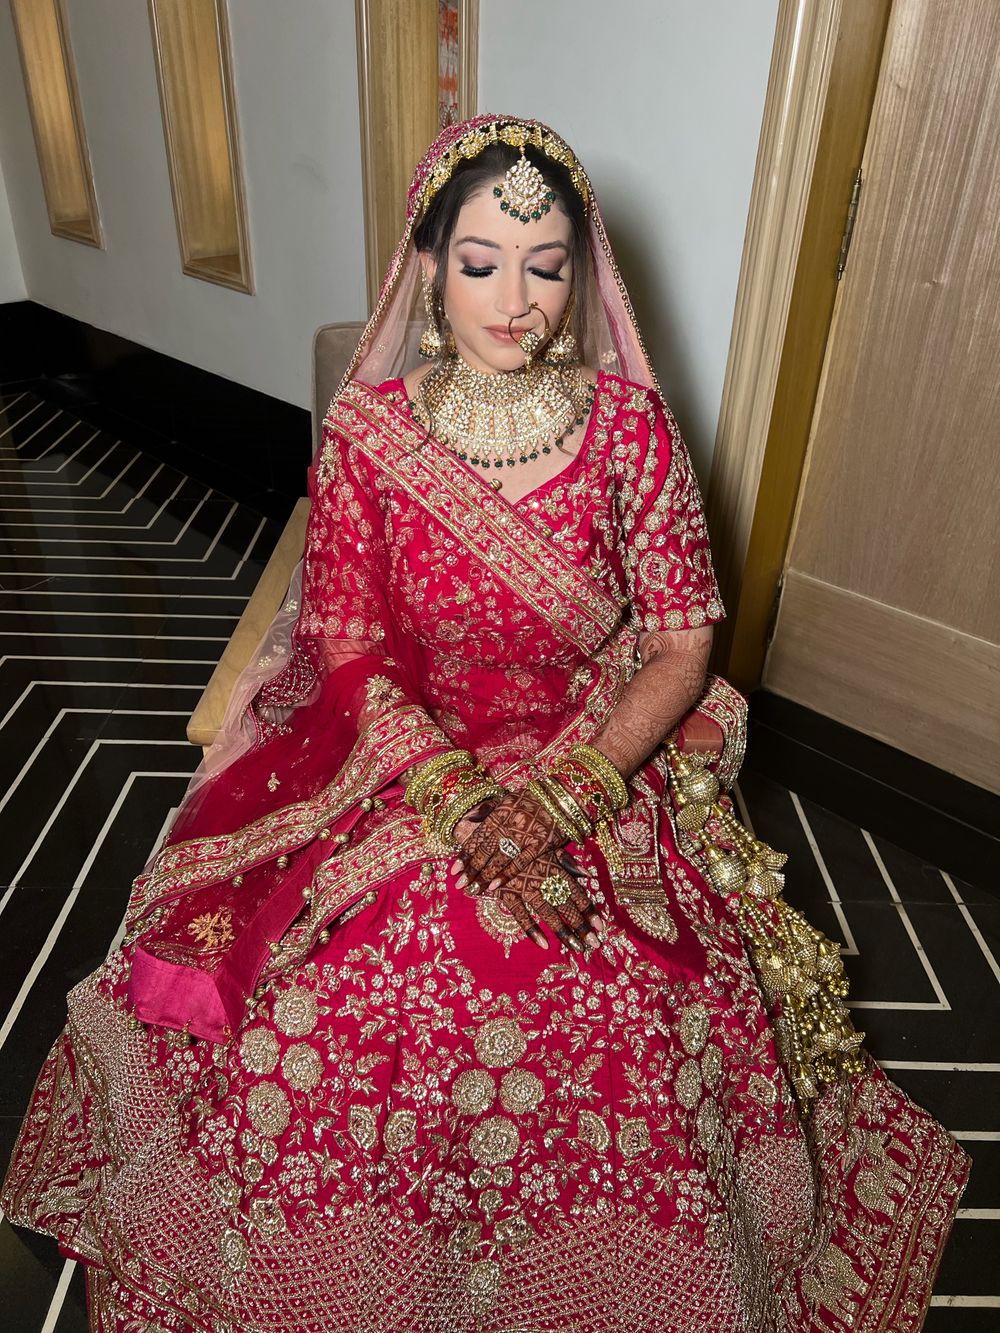 Photo By Make Me Up by Parul - Bridal Makeup